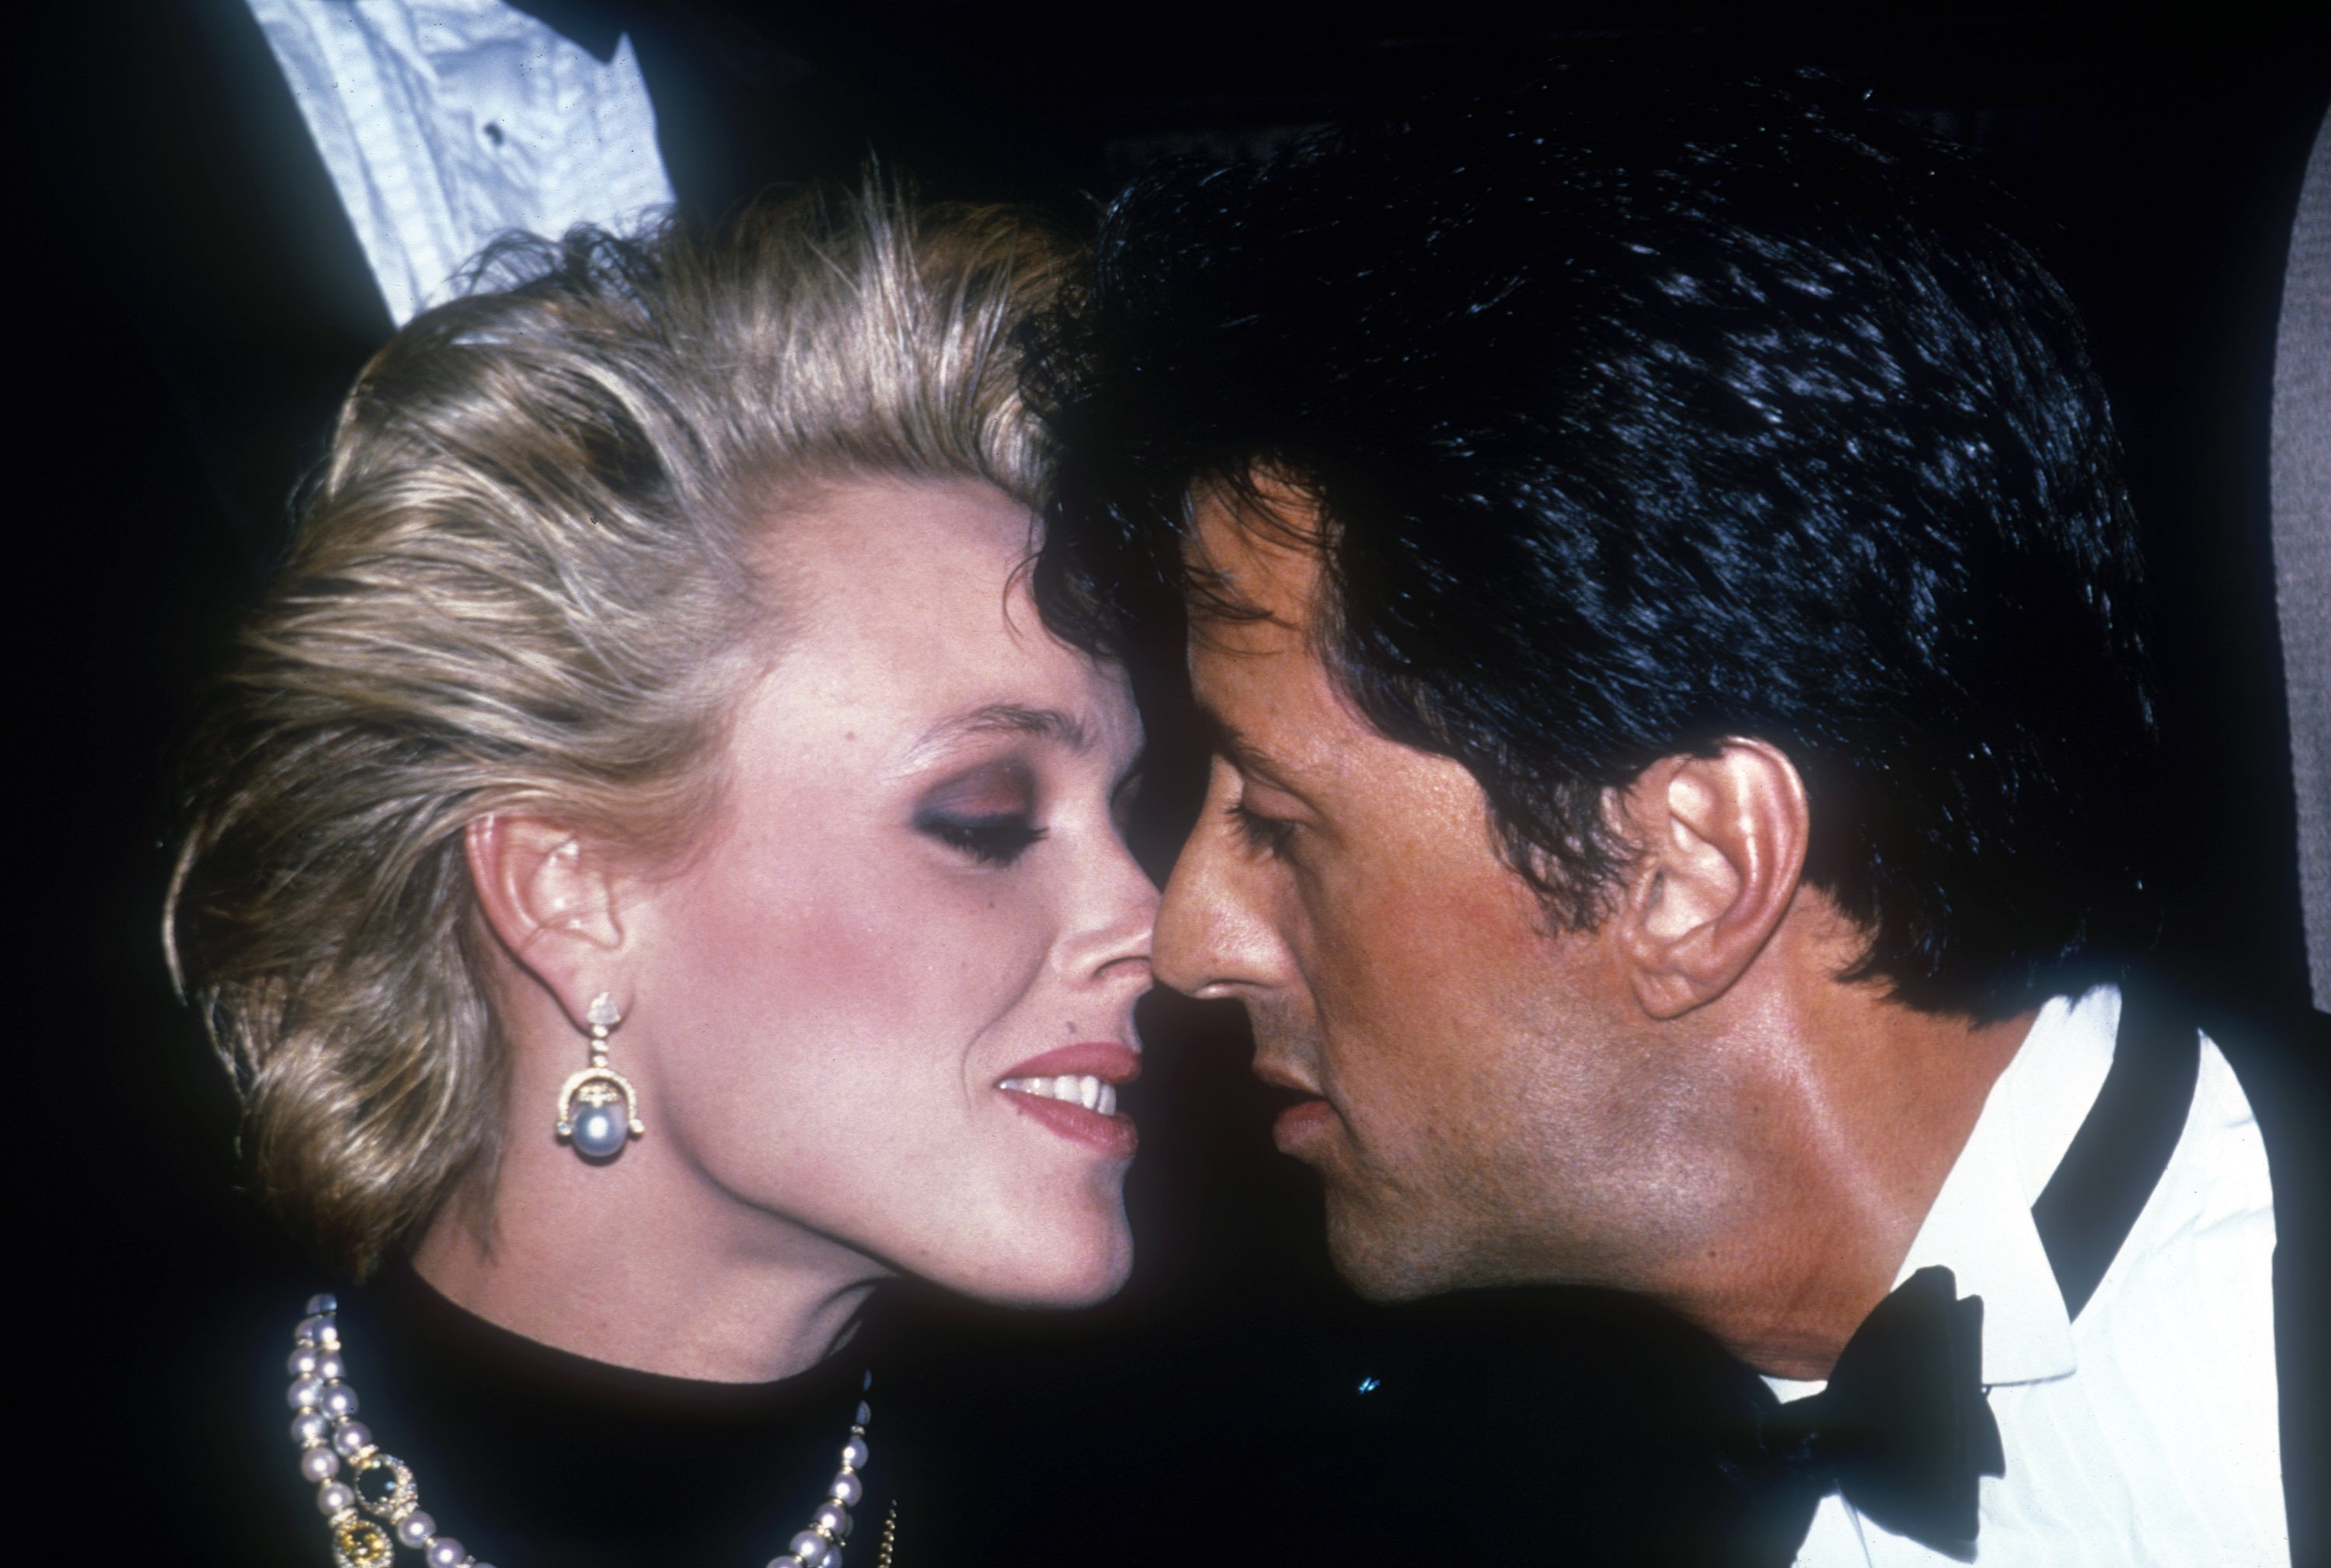 American actor Sylvester Stallone and Brigitte Nielsen attend a ceremony where he was presented with the 'Man of the Year' award by the Hasty Pudding Theatricals group at Harvard University on February 18, 1986 in Cambridge, Massachusetts | Photo: Getty Images